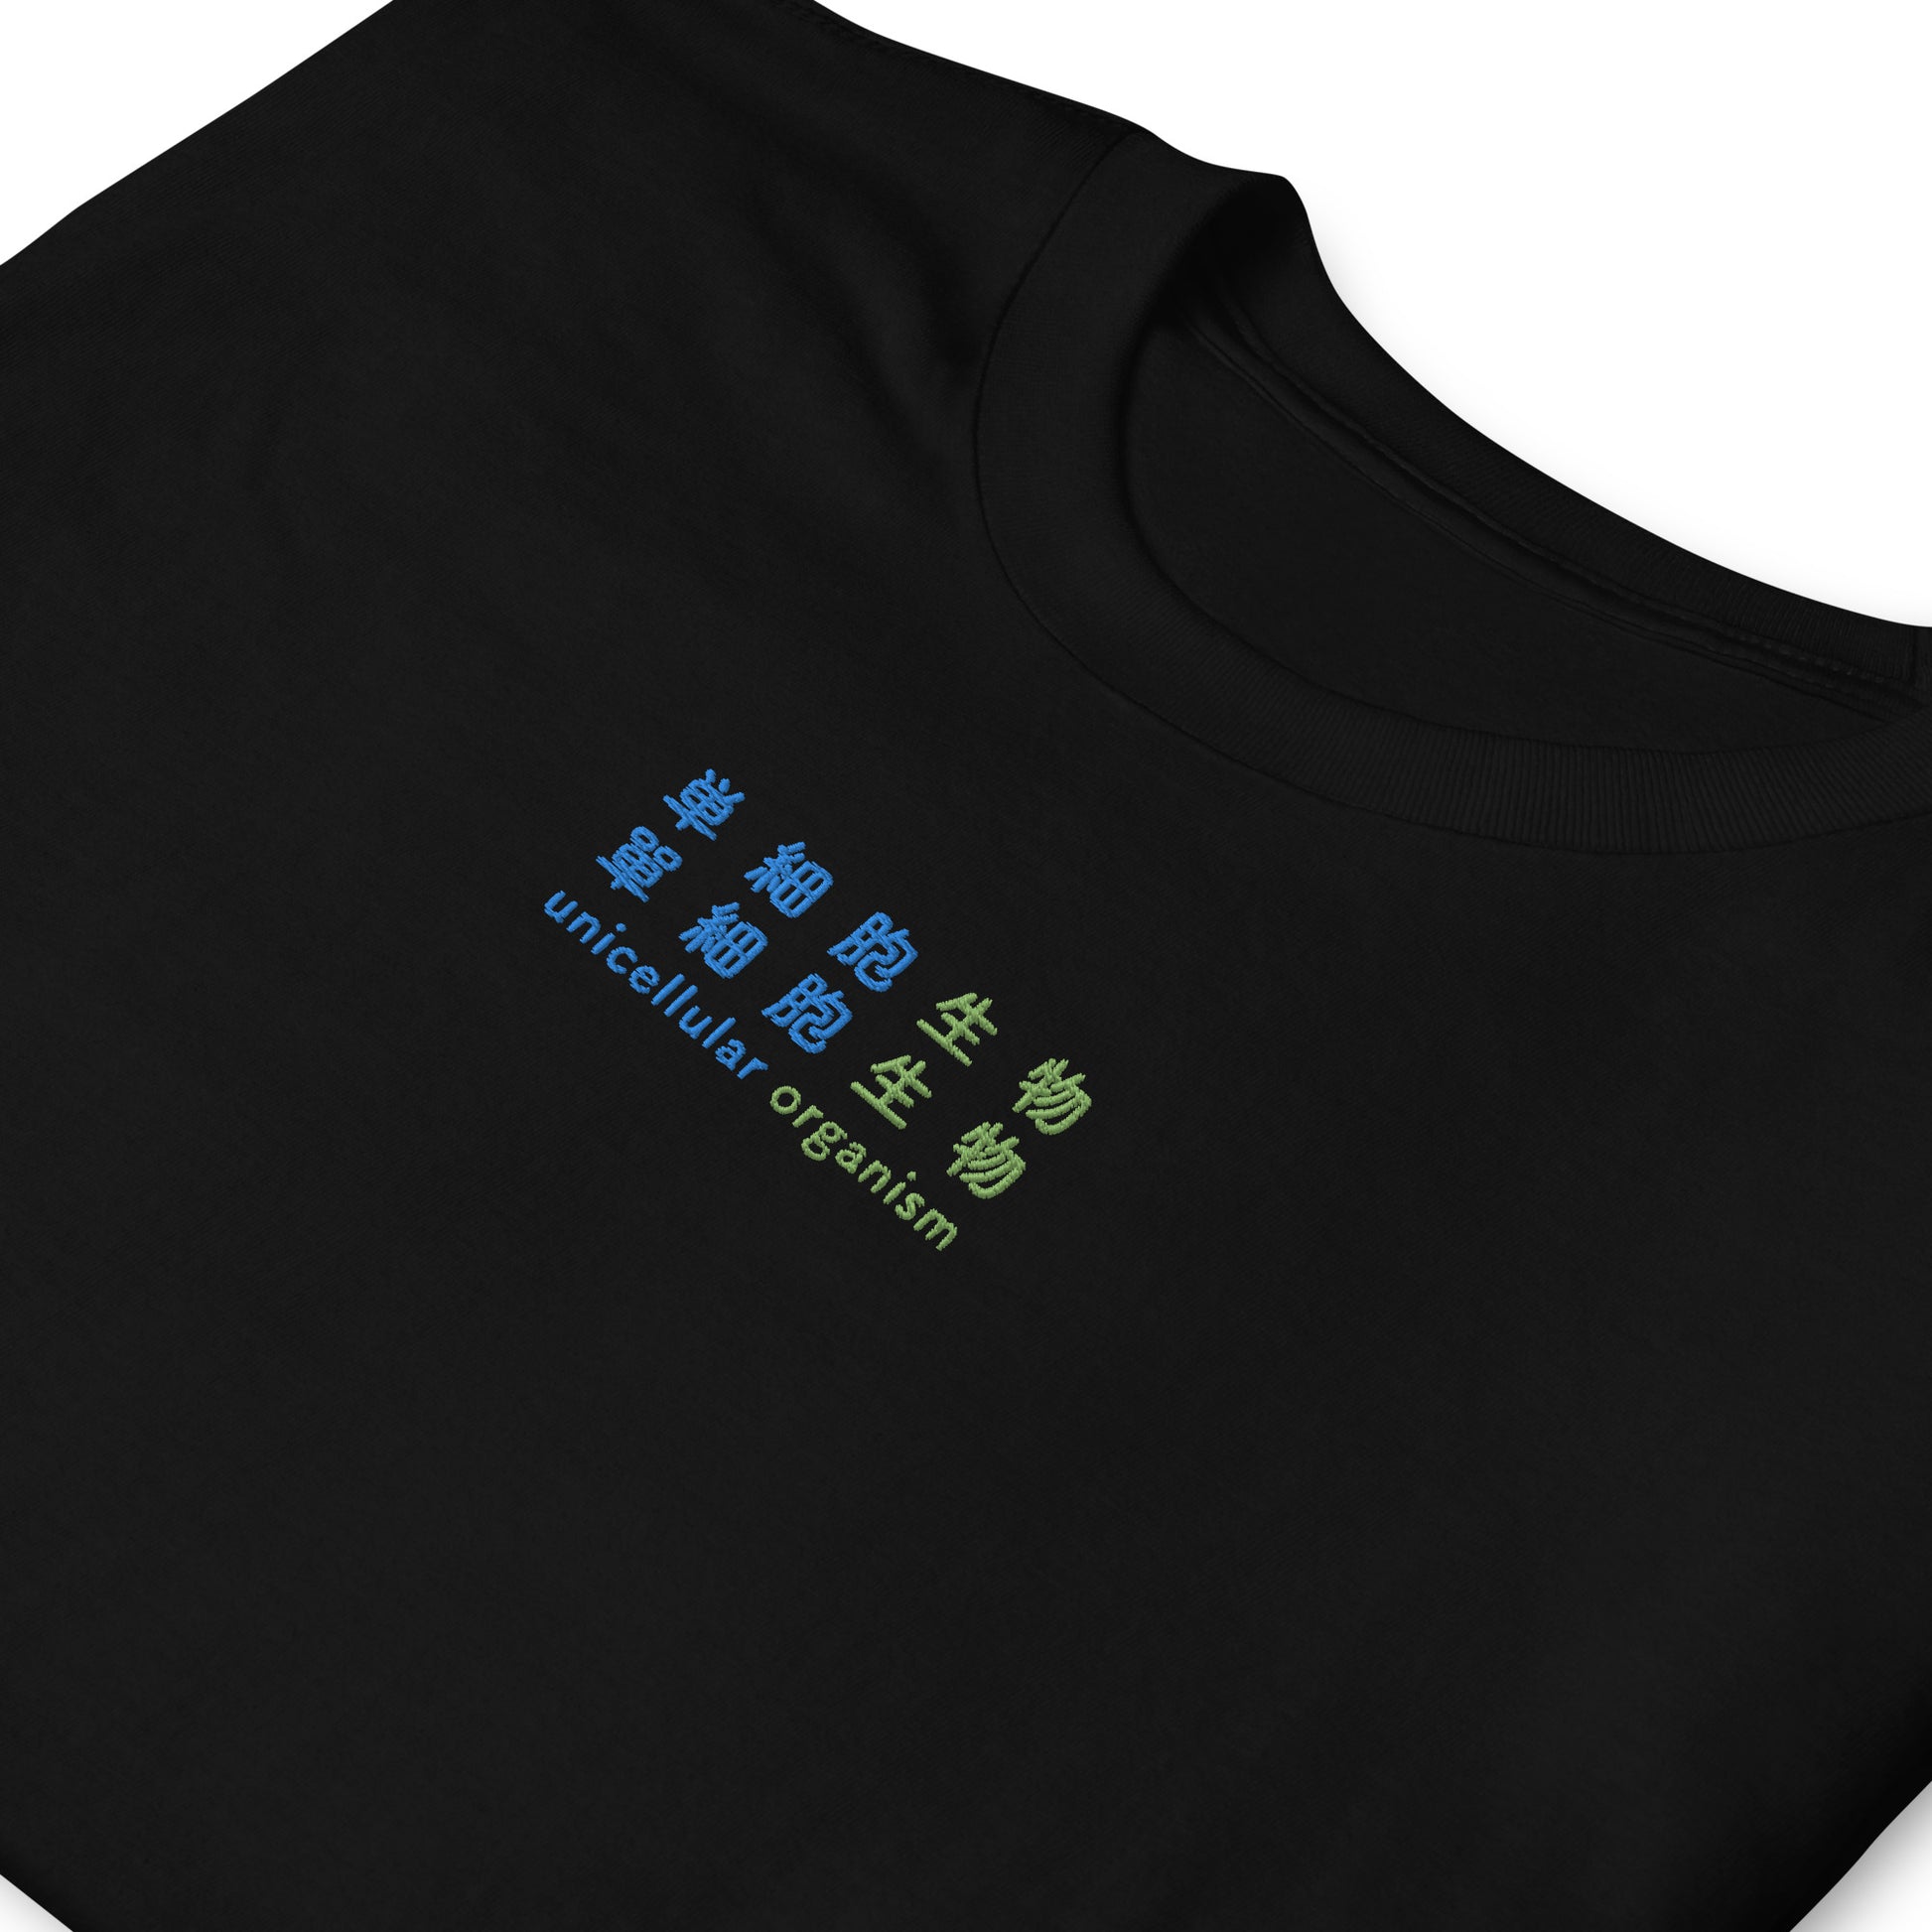 Black High Quality Tee - Front Design with an Green,Blue Embroidery "unicellular organism" in Japanese,Chinese and English